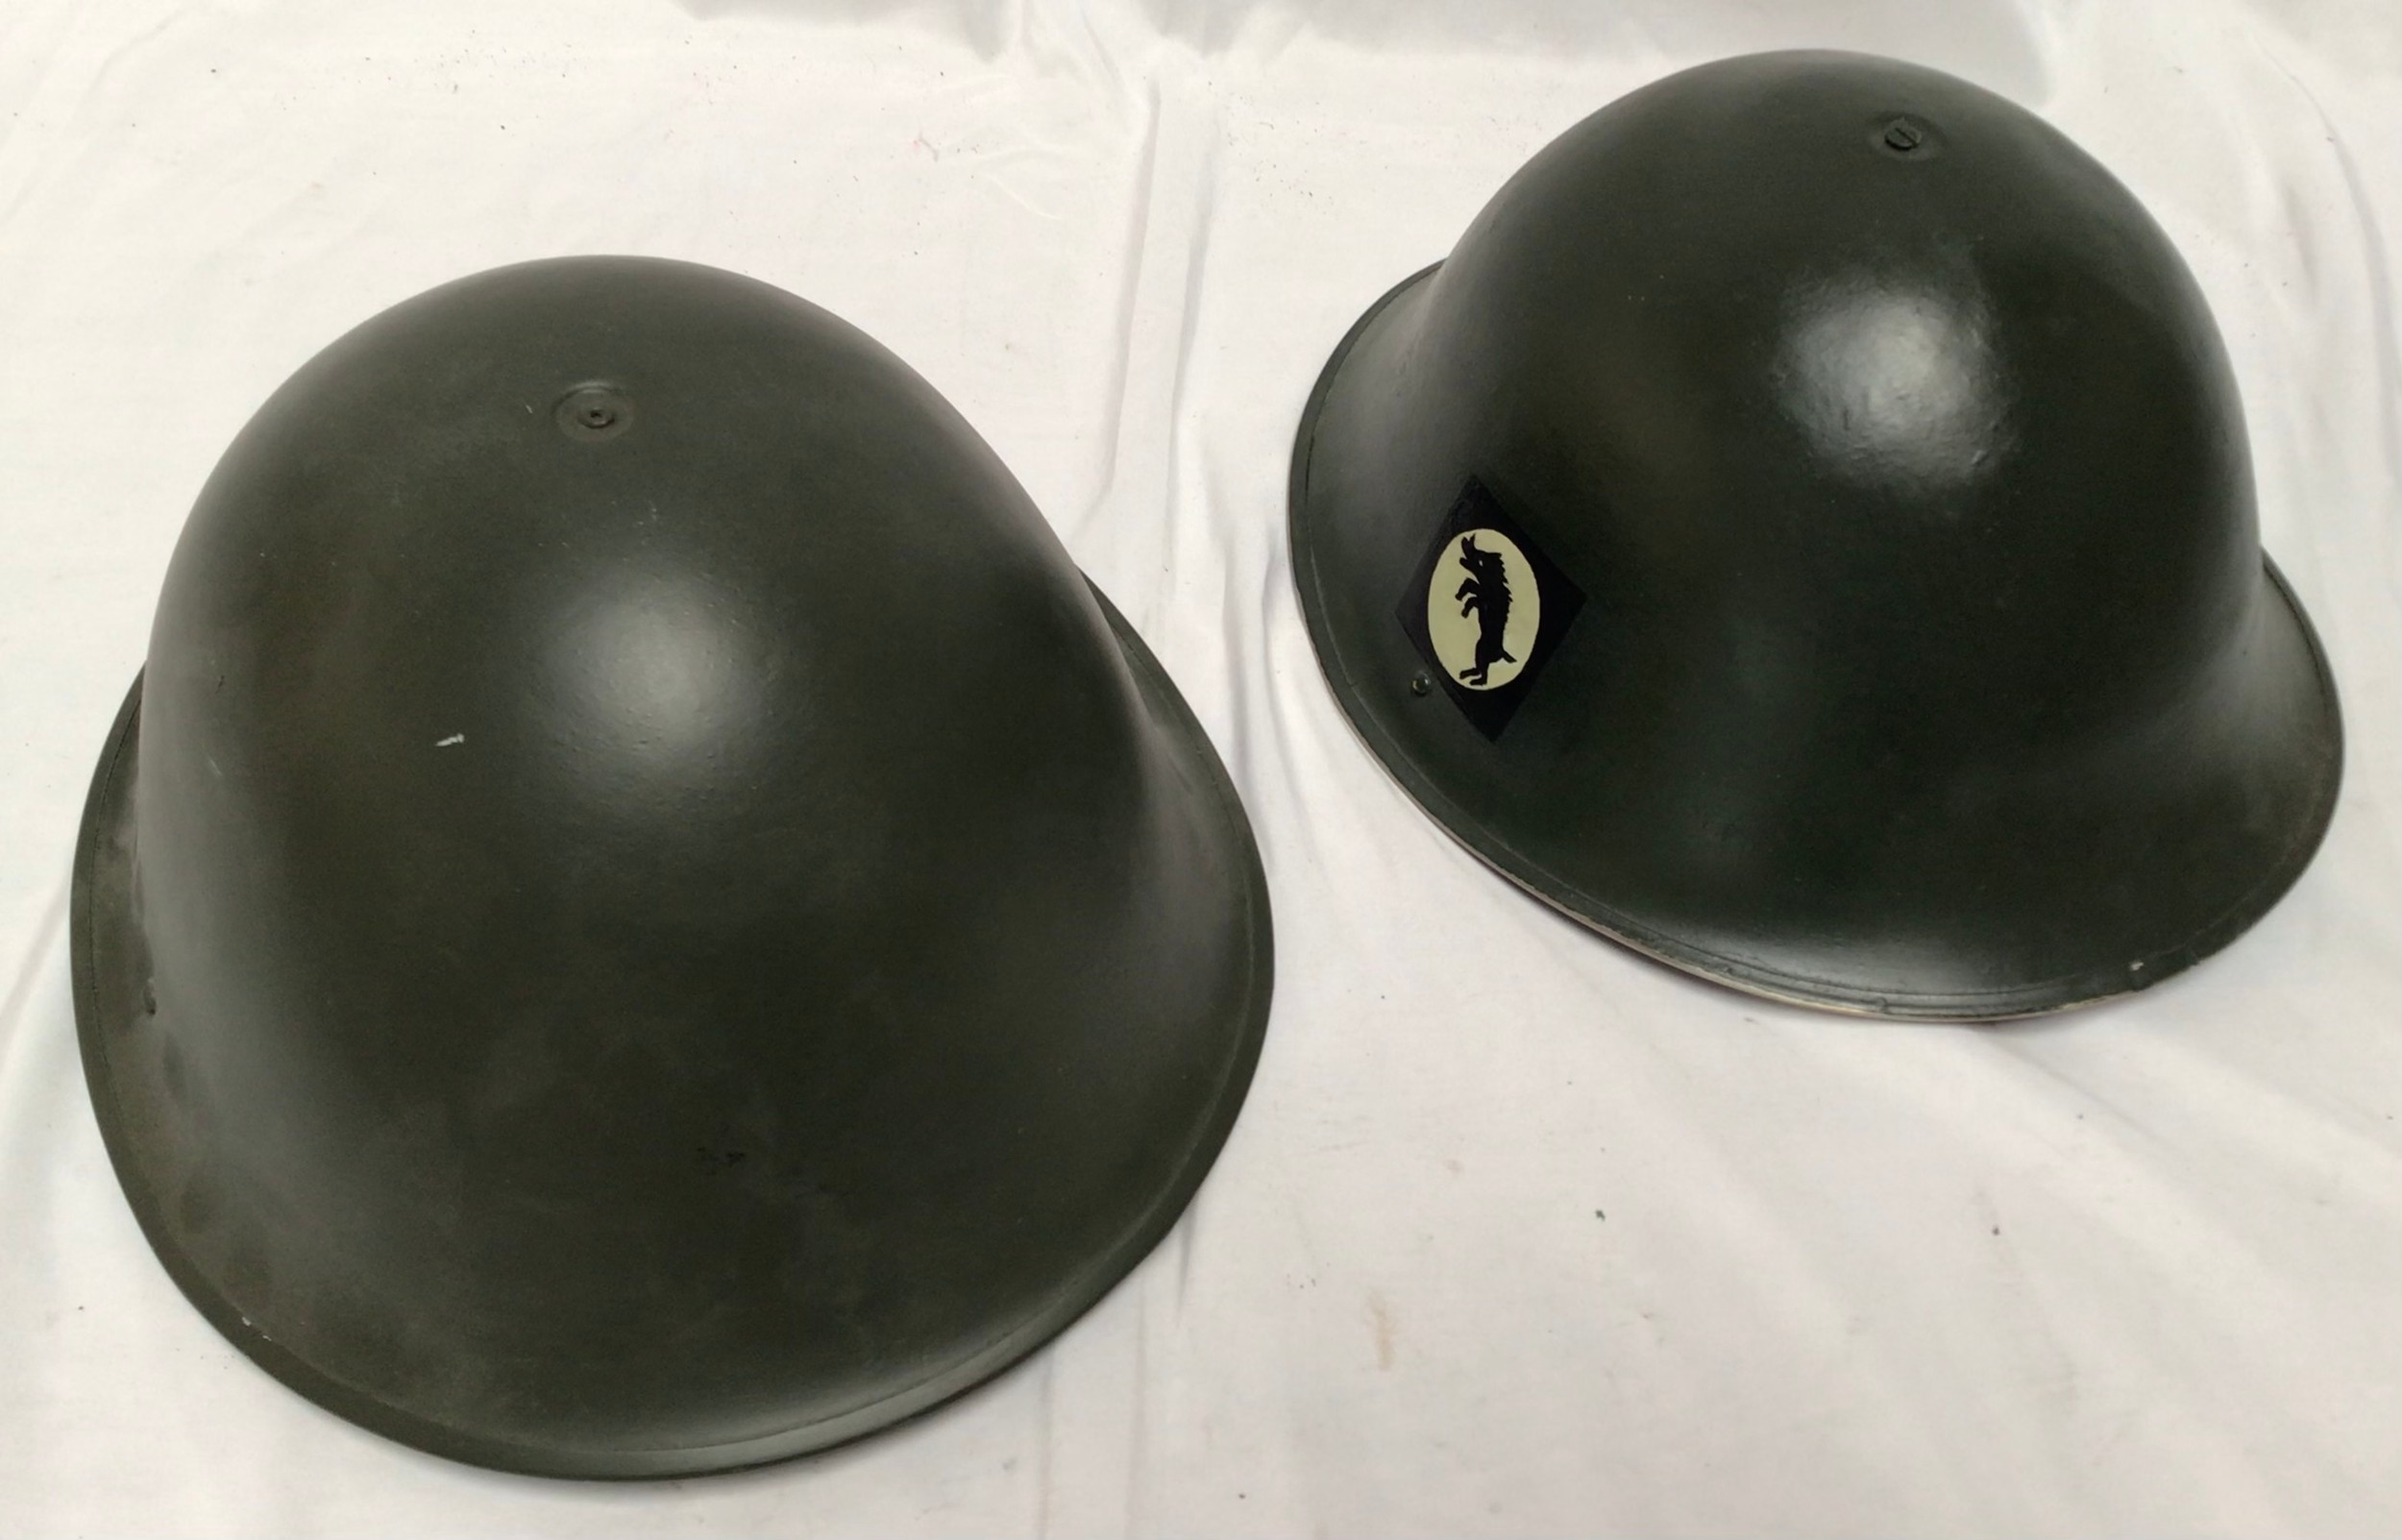 A WWII era British green painted steel turtle back helmet, with painted patches to each side